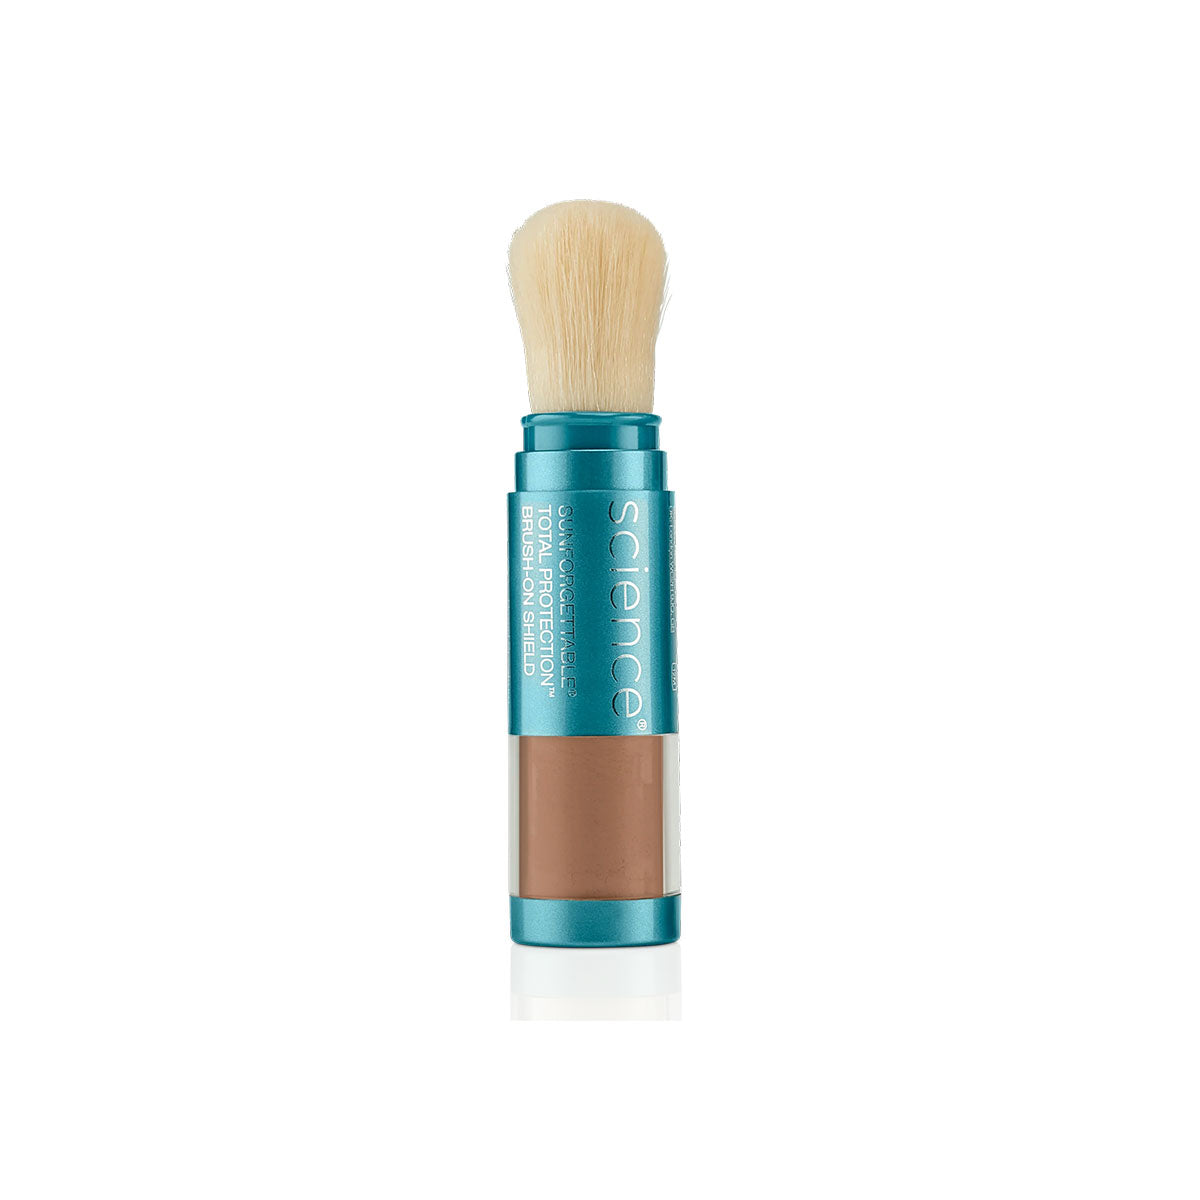 colorescience Products Sunforgettable Total Protection Brush-on Shield SPF 50 deep